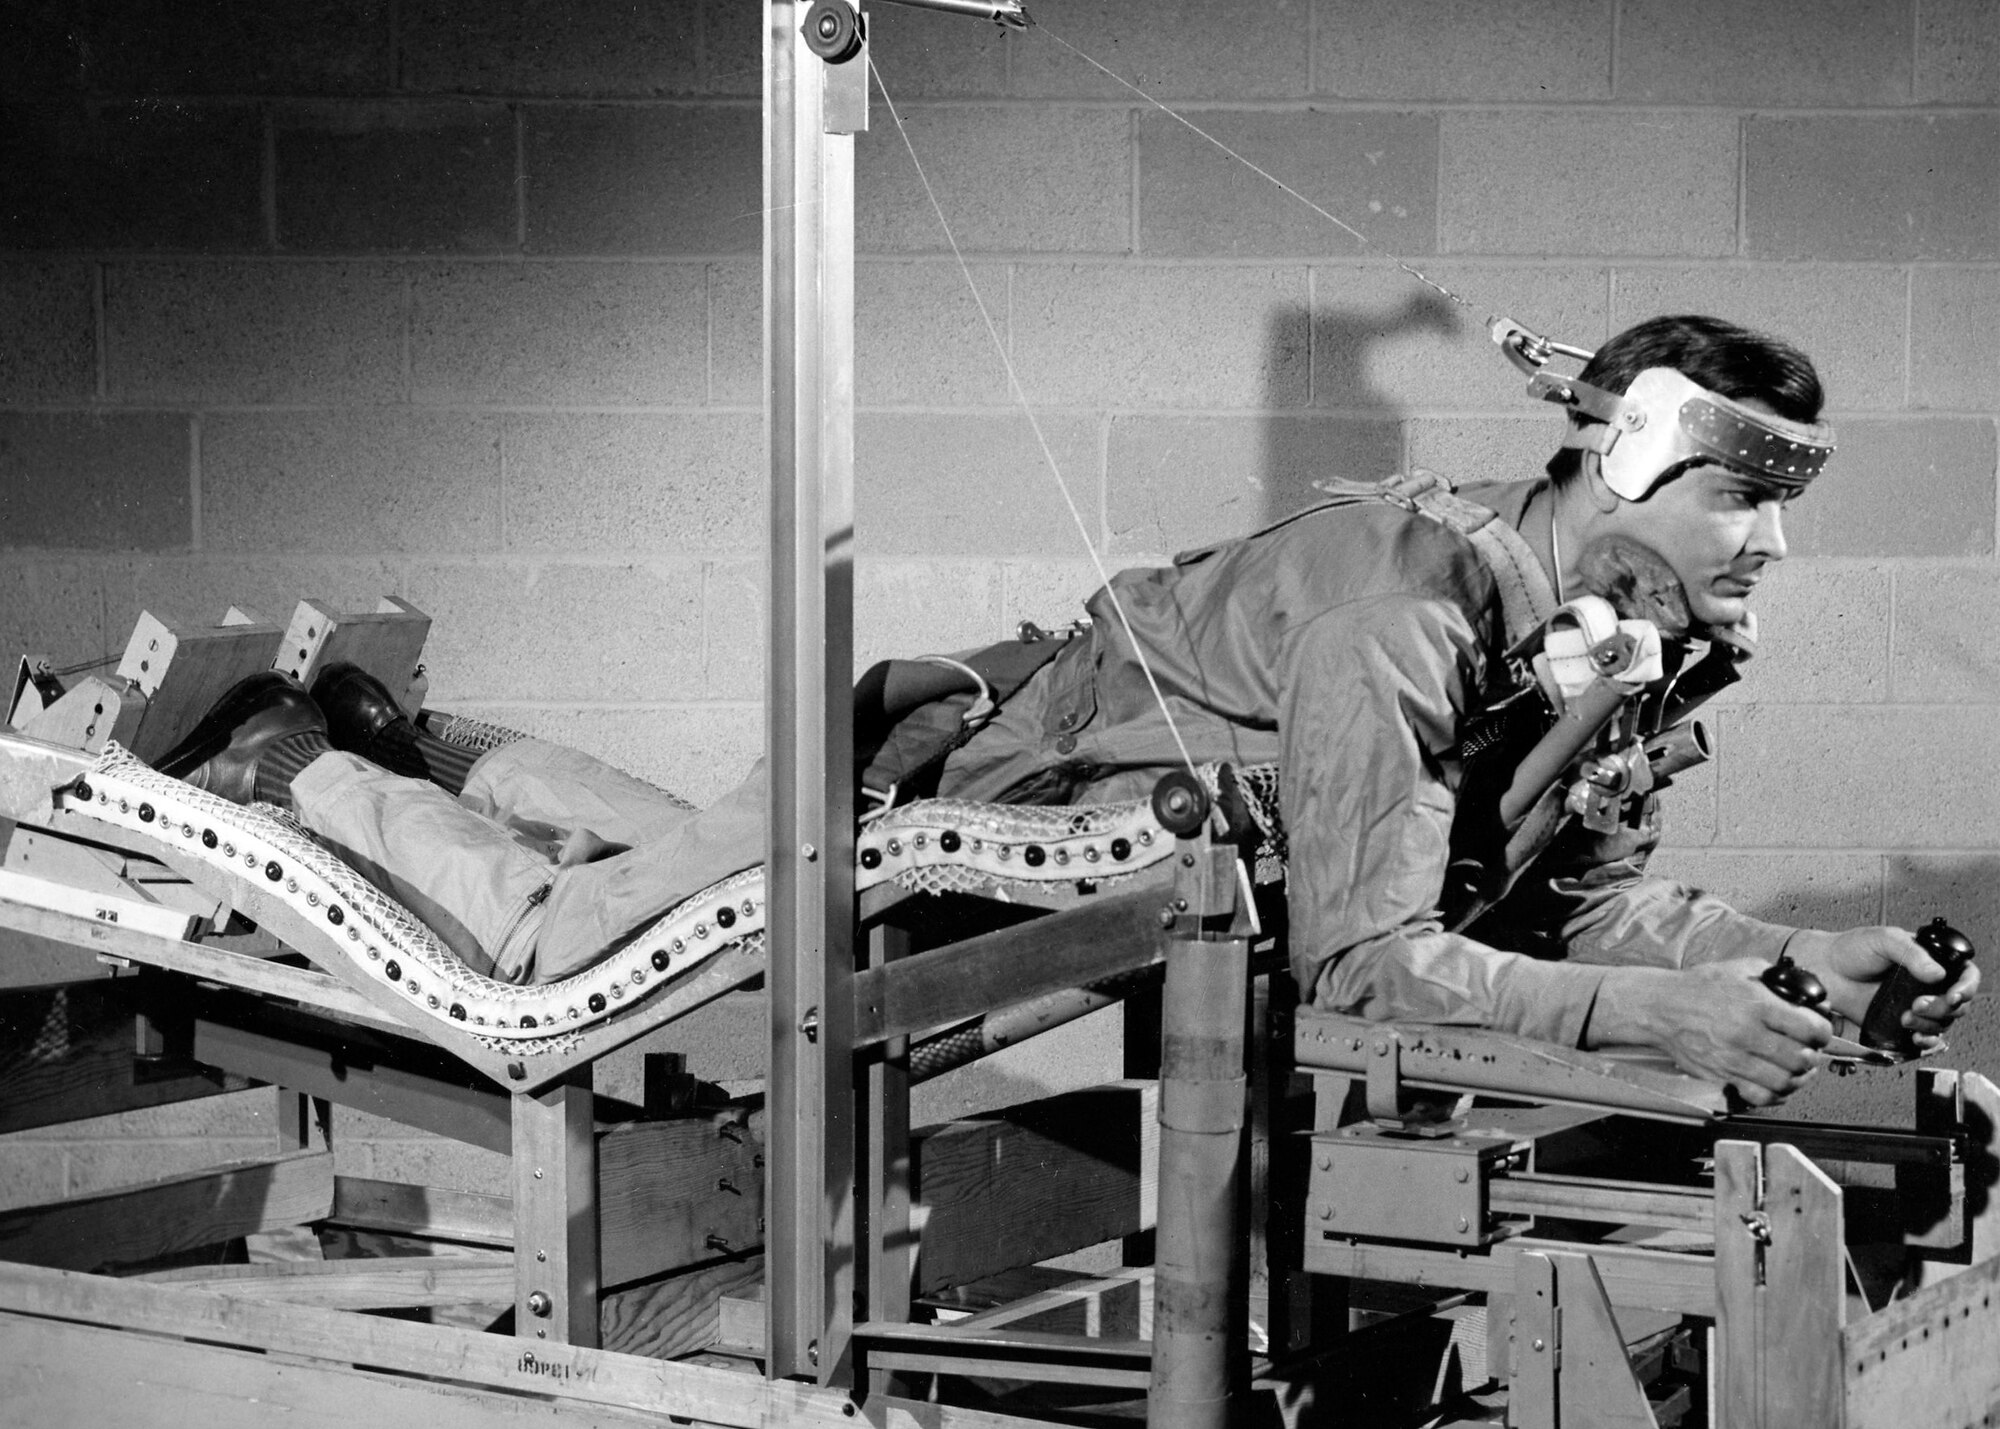 U.S. Air Force Aeromedical Laboratory scientists test a prone-position “pilot bed,” on February 3, 1949. AFRL designed the bed to relieve the gravitational stress on pilots, as part of research to solve medical challenges presented by space flight. (U.S Air Force photo)